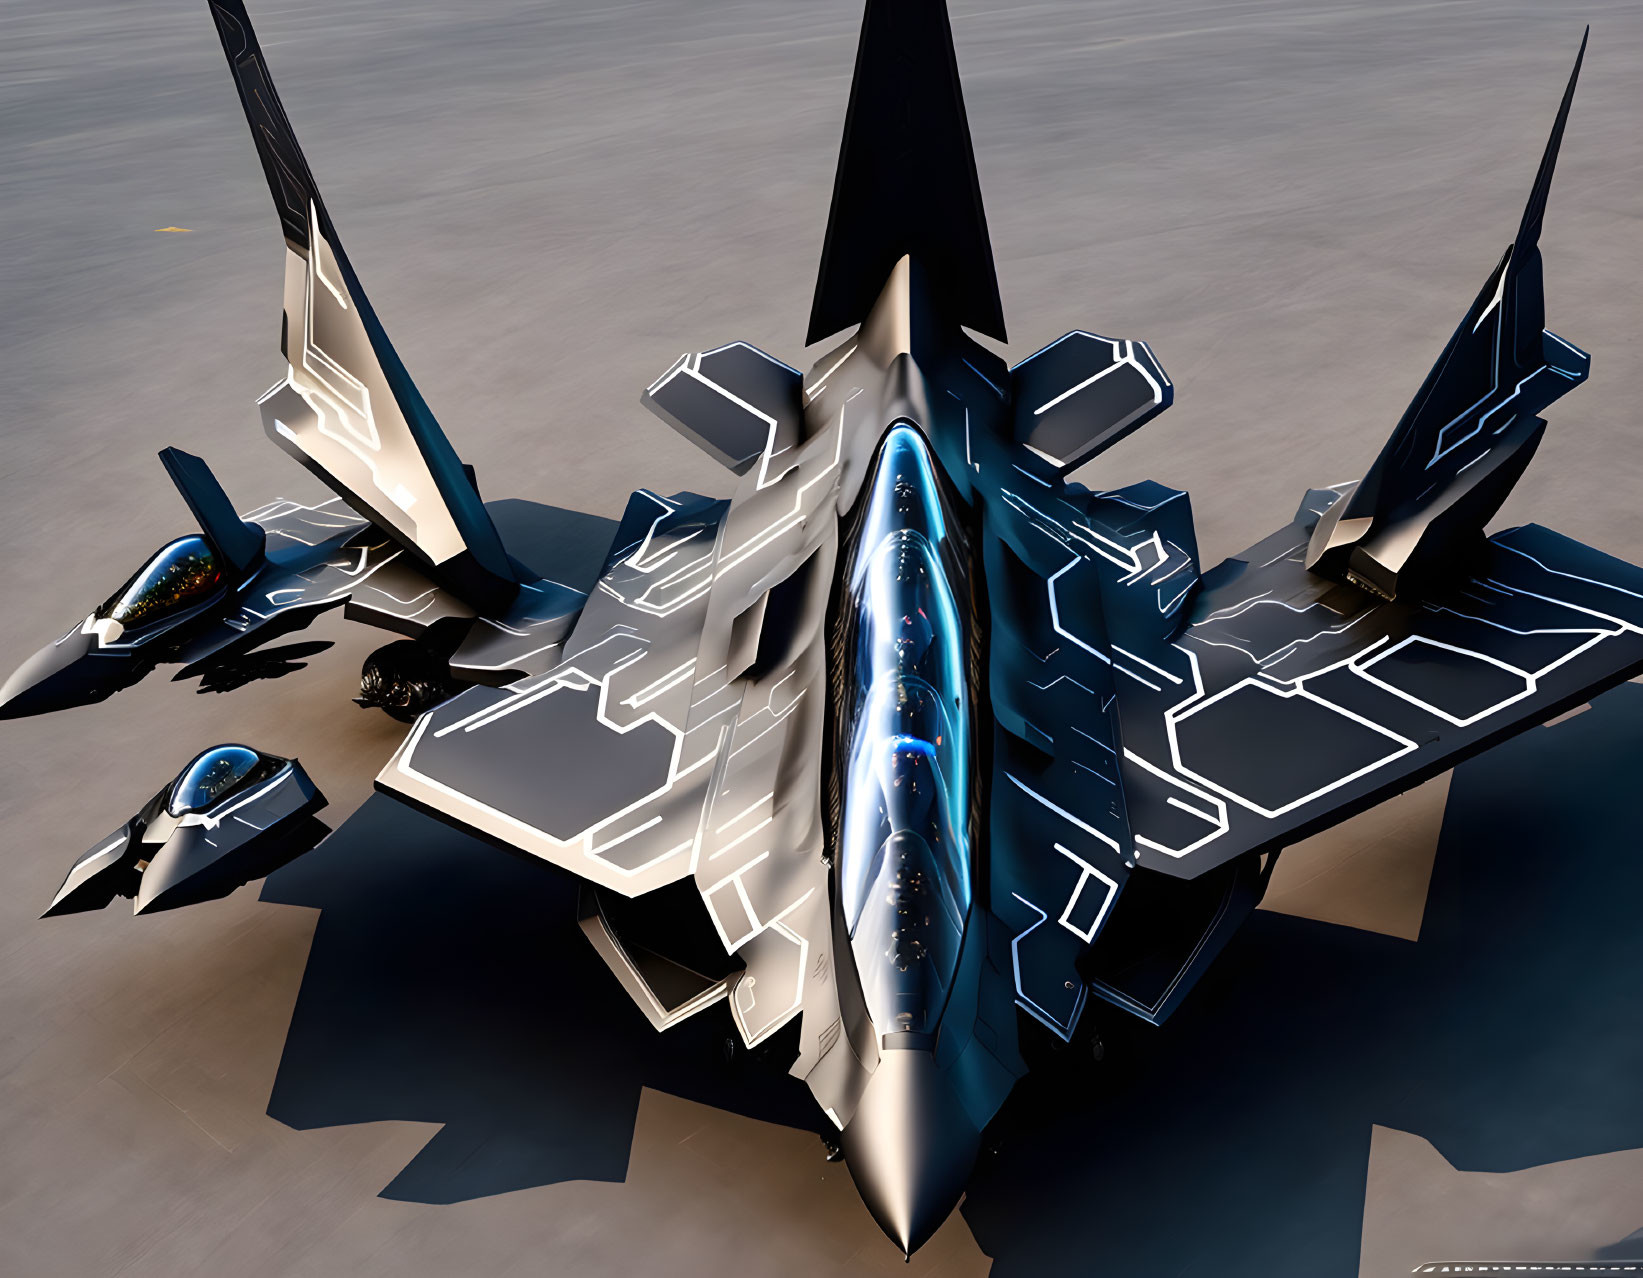 Sleek futuristic fighter jet with blue neon highlights and drones